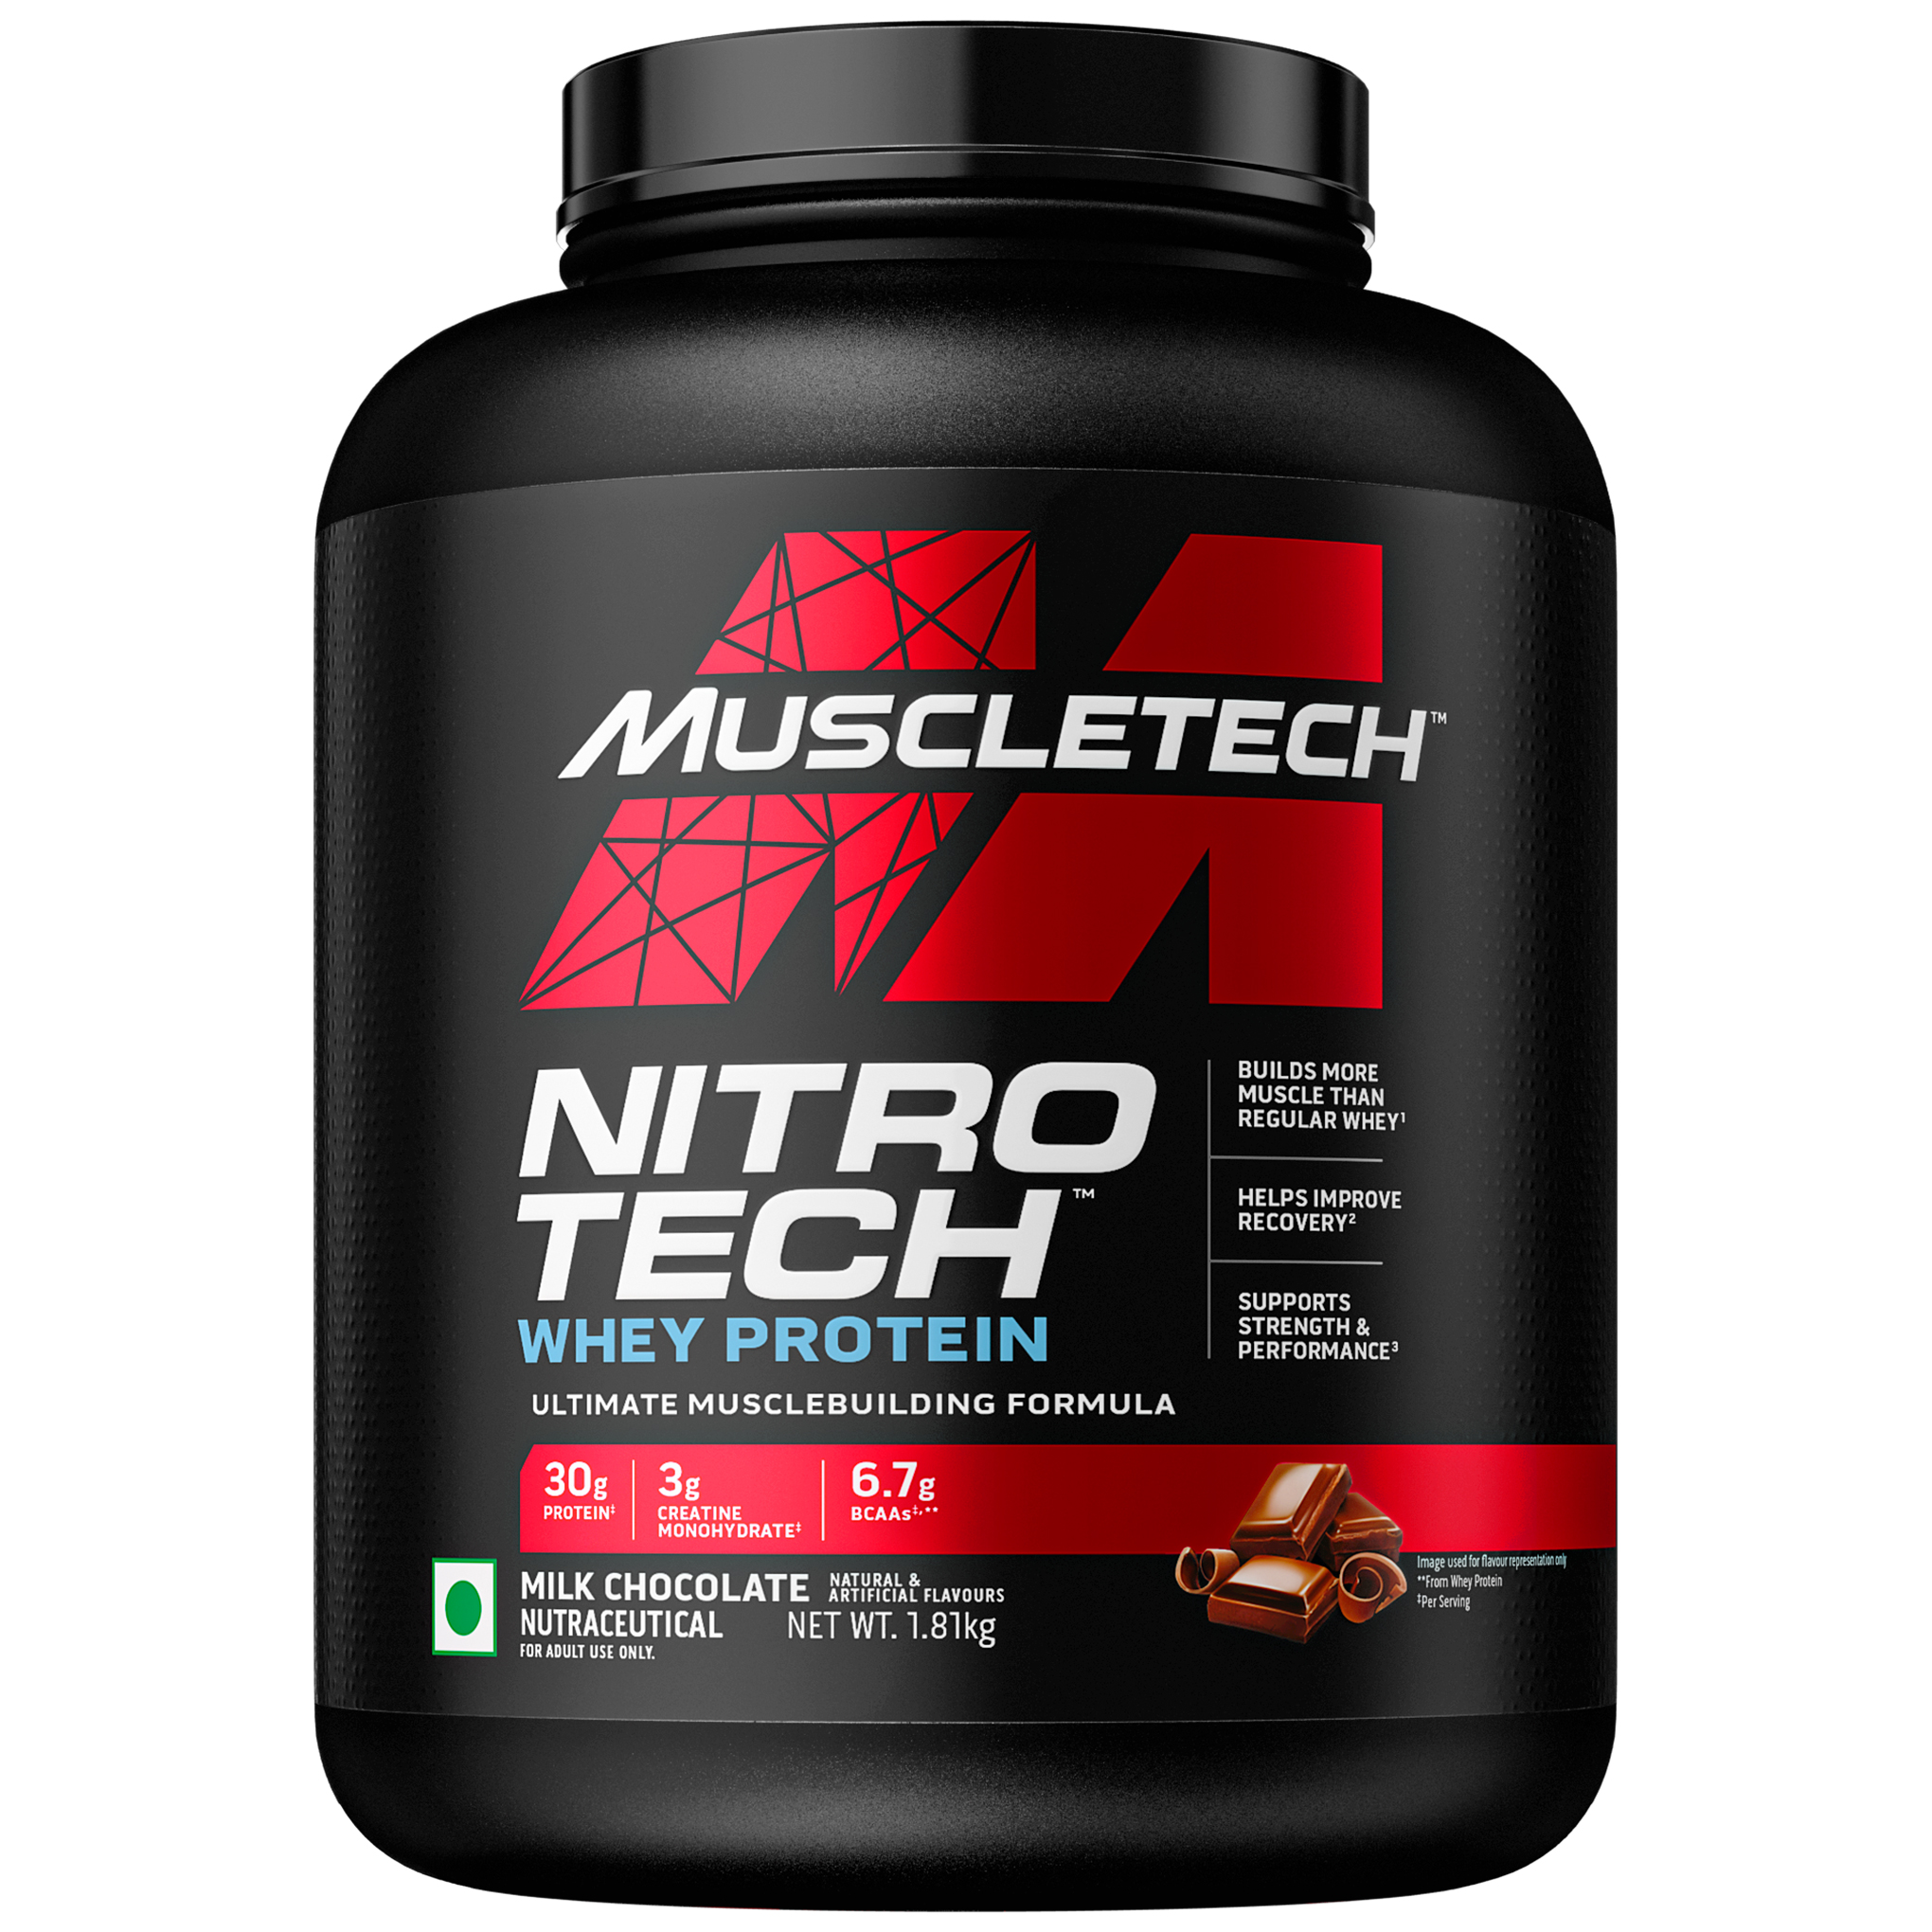 Muscletech NitroTech Whey Protein with Creatine Formula